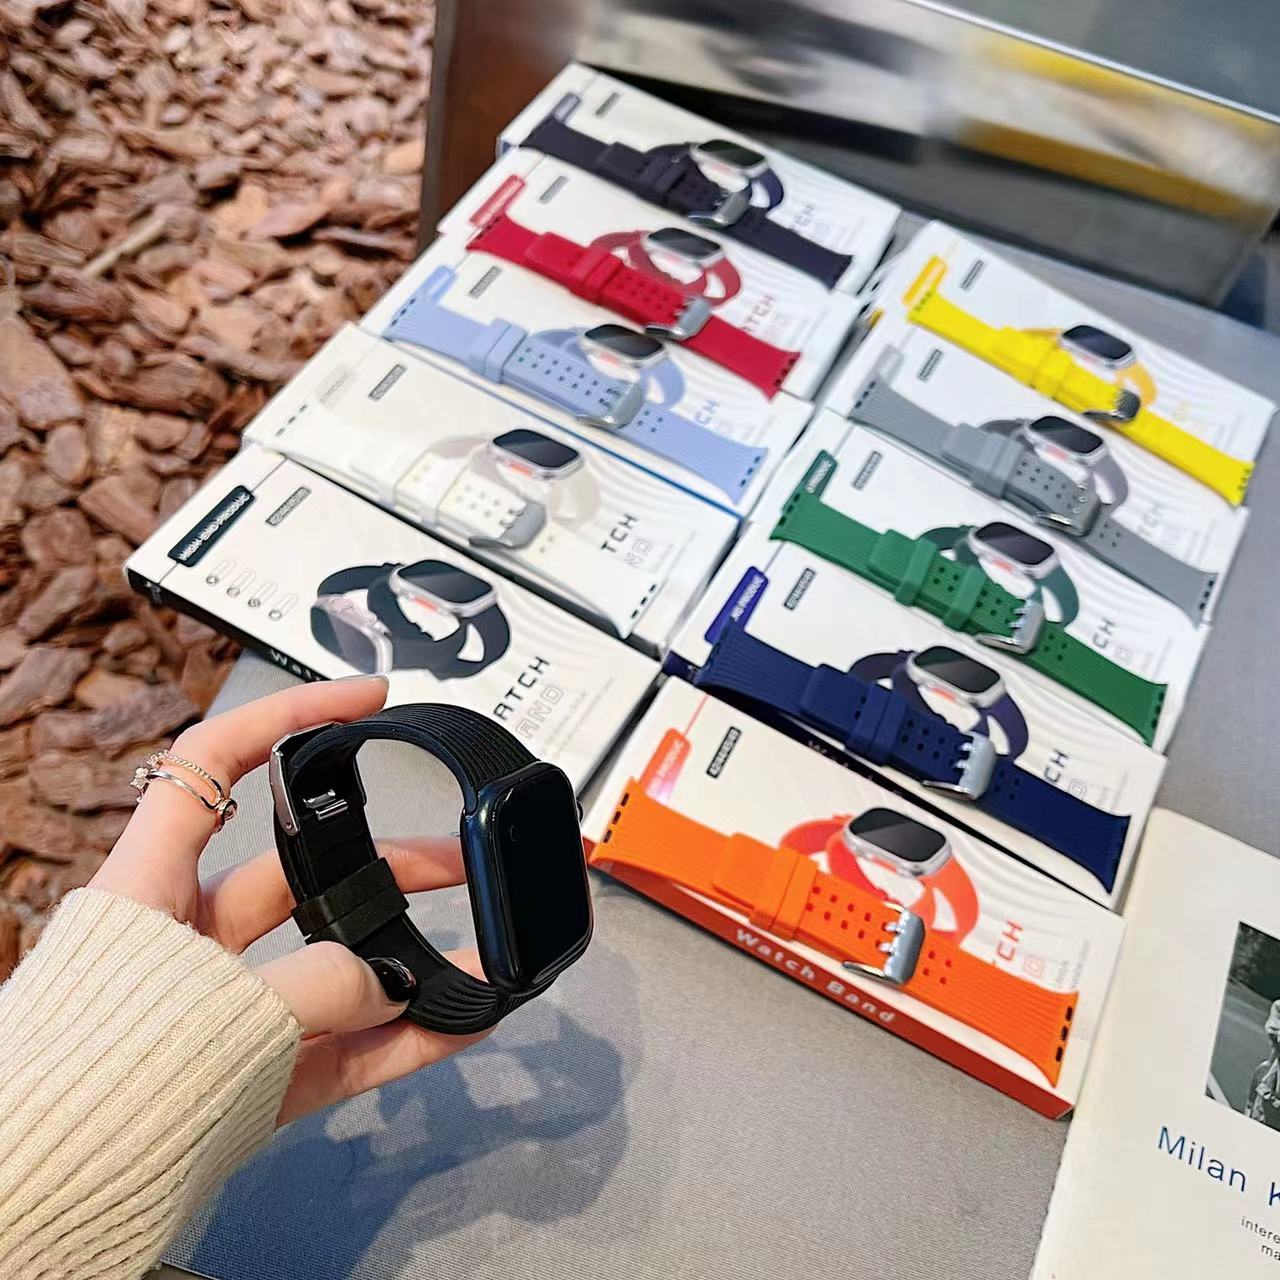 Premium Skin Soft Silicone Straps by iSeriesub Compatible For iWatch